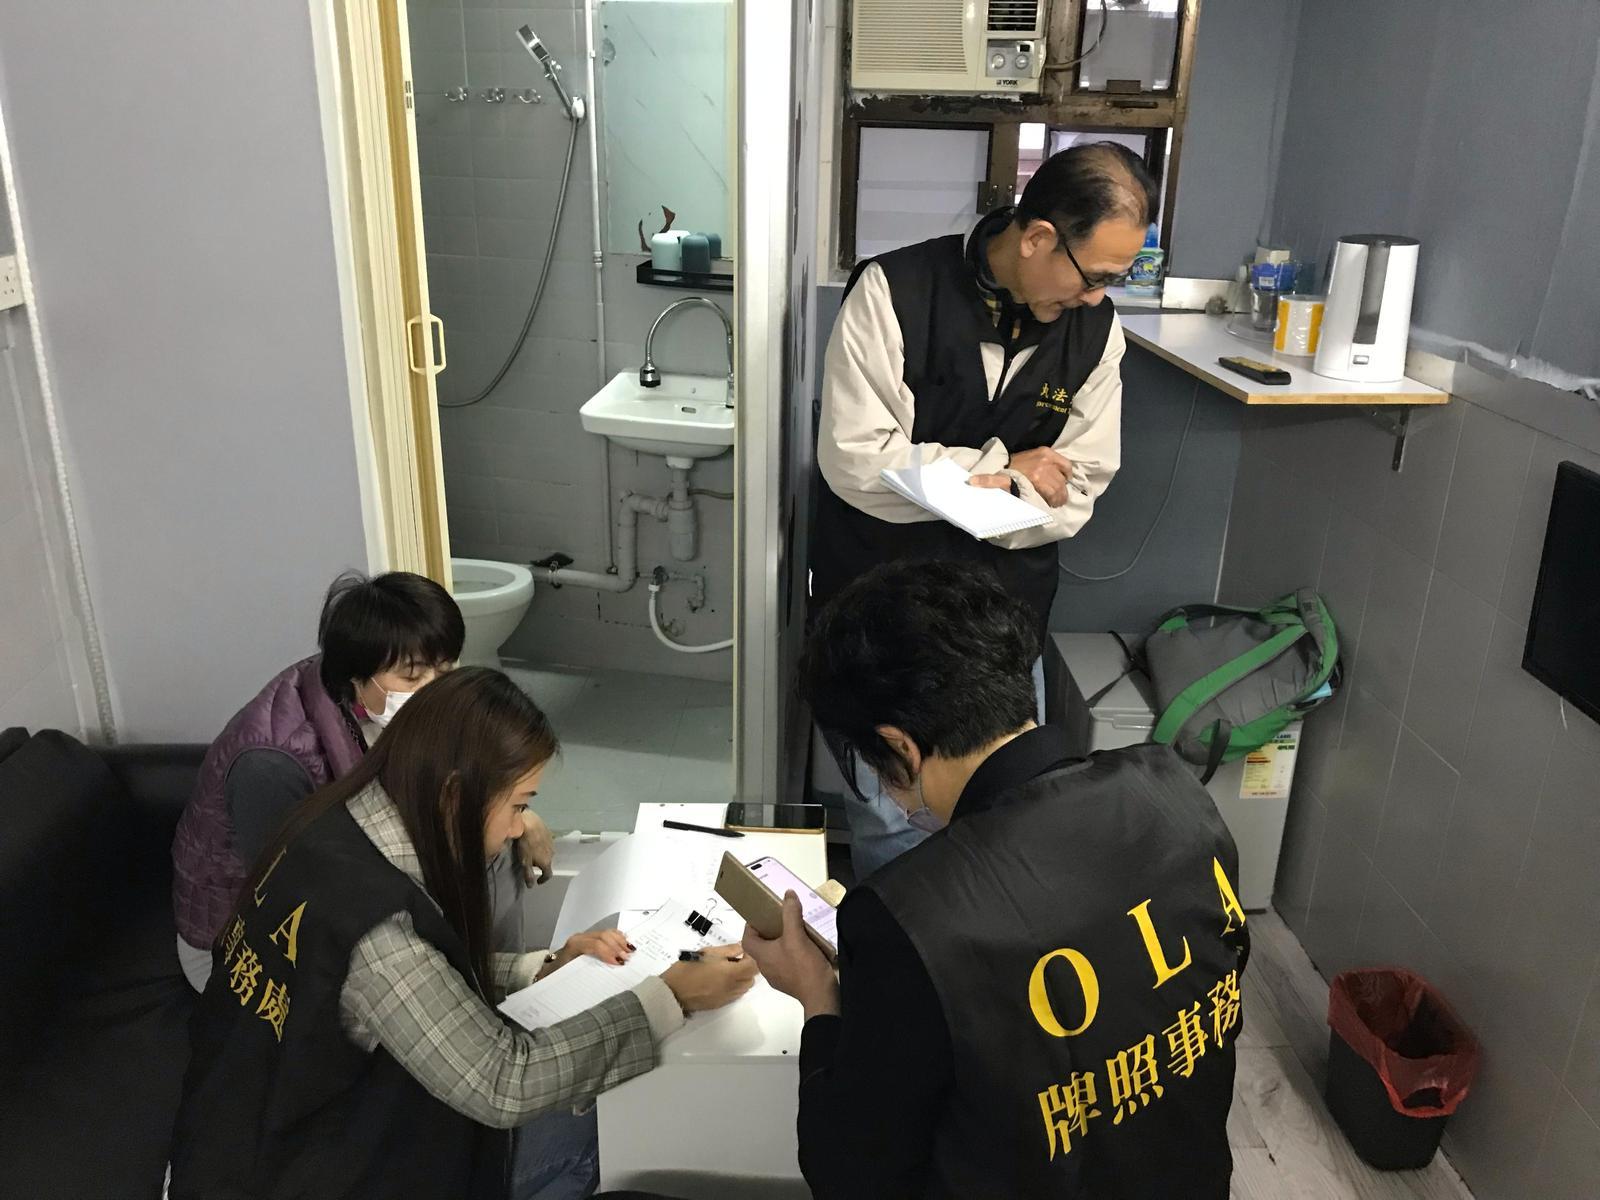 The Office of the Licensing Authority (OLA) of the Home Affairs Department conducted a joint operation with the Fire Services Department codenamed "Solar Flare" against unlicensed hotels/guesthouses and illegal club-house operations for two consecutive days on December 20 and 21 at various spots in areas of Hong Kong Island and Kowloon. Photo shows OLA enforcement officers searching for evidence in a suspected unlicensed guesthouse.